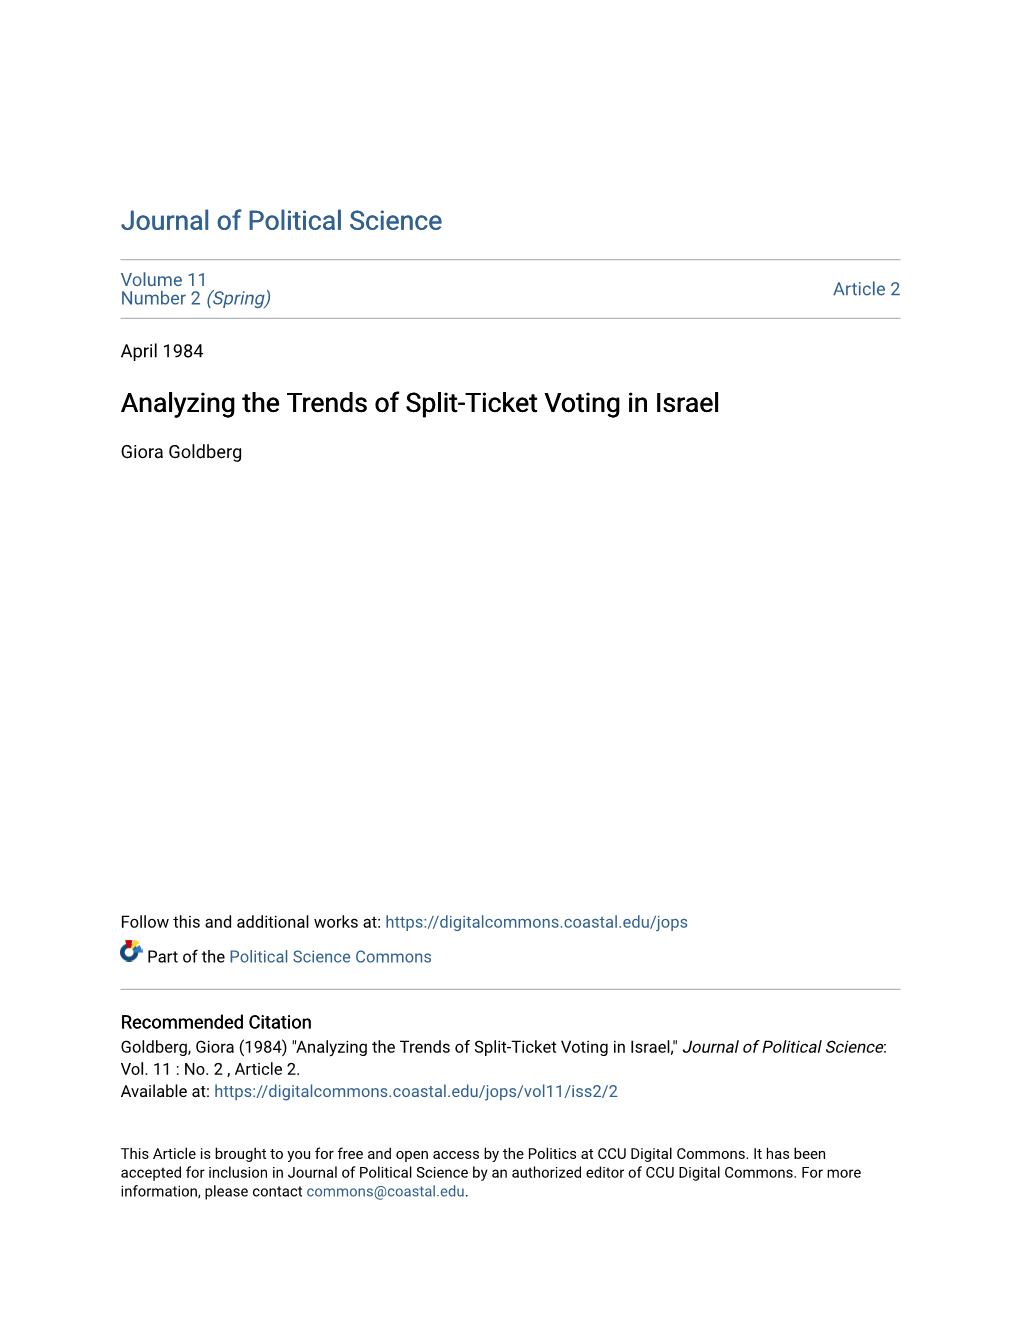 Analyzing the Trends of Split-Ticket Voting in Israel